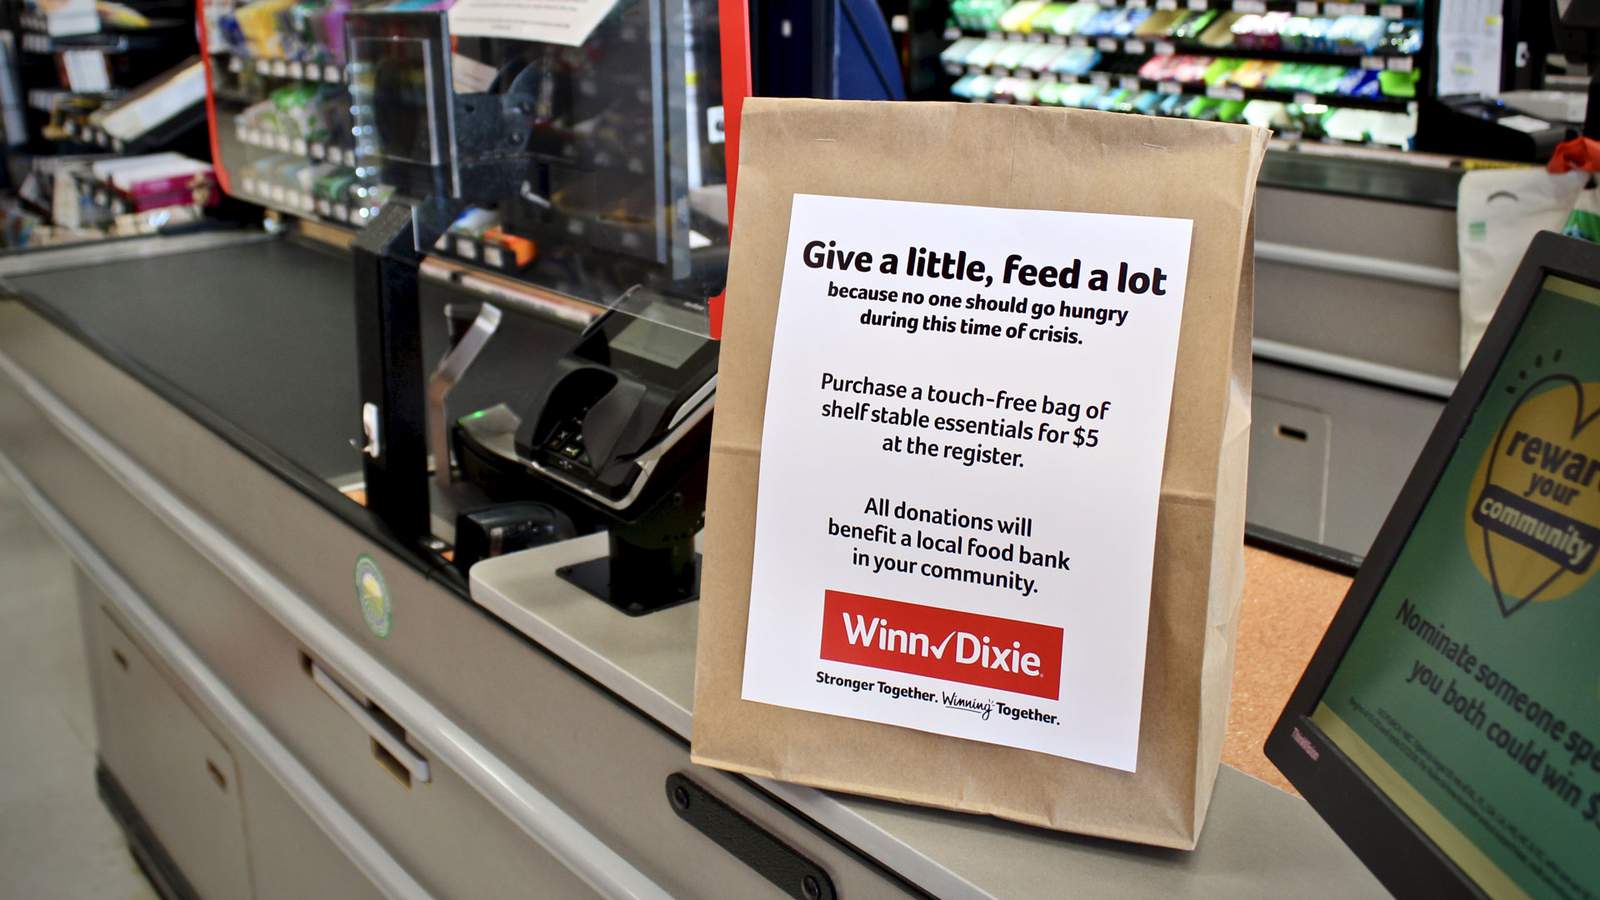 Winn-Dixie, affiliated grocers raise nearly $1.3 million to support food banks